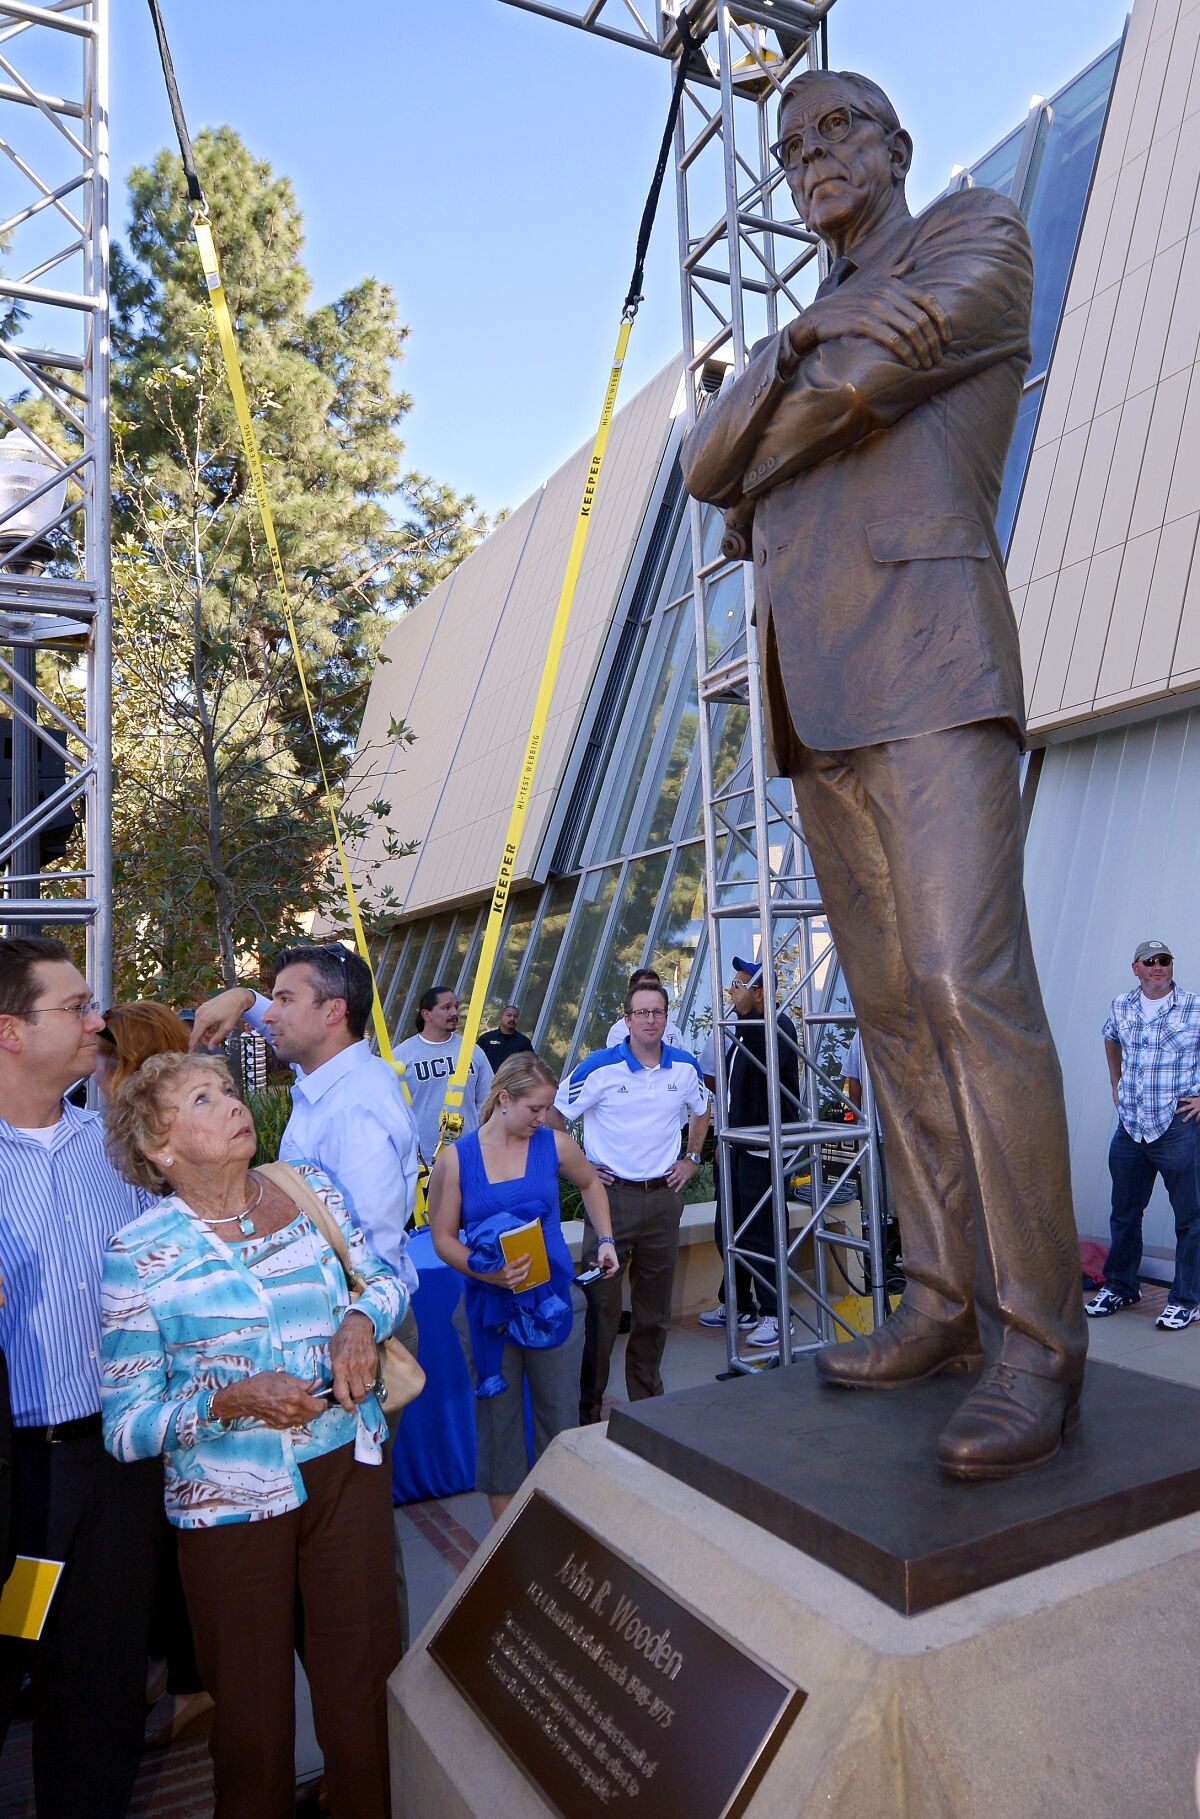 FILE - In this Oct. 26, 2012, file photo, Nan Wooden looks at a statue of her late father, UCLA men's basketball coach John Wooden, after its unveiling outside the new Pauley Pavilion at UCLA in Los Angeles. Nan Wooden died Tuesday, Sept. 14, 2021. She was 87. The school said she died of natural causes at a care facility in the San Fernando Valley, according to family members. She had suffered a series of strokes in recent years. (AP Photo/Mark J. Terrill, File)